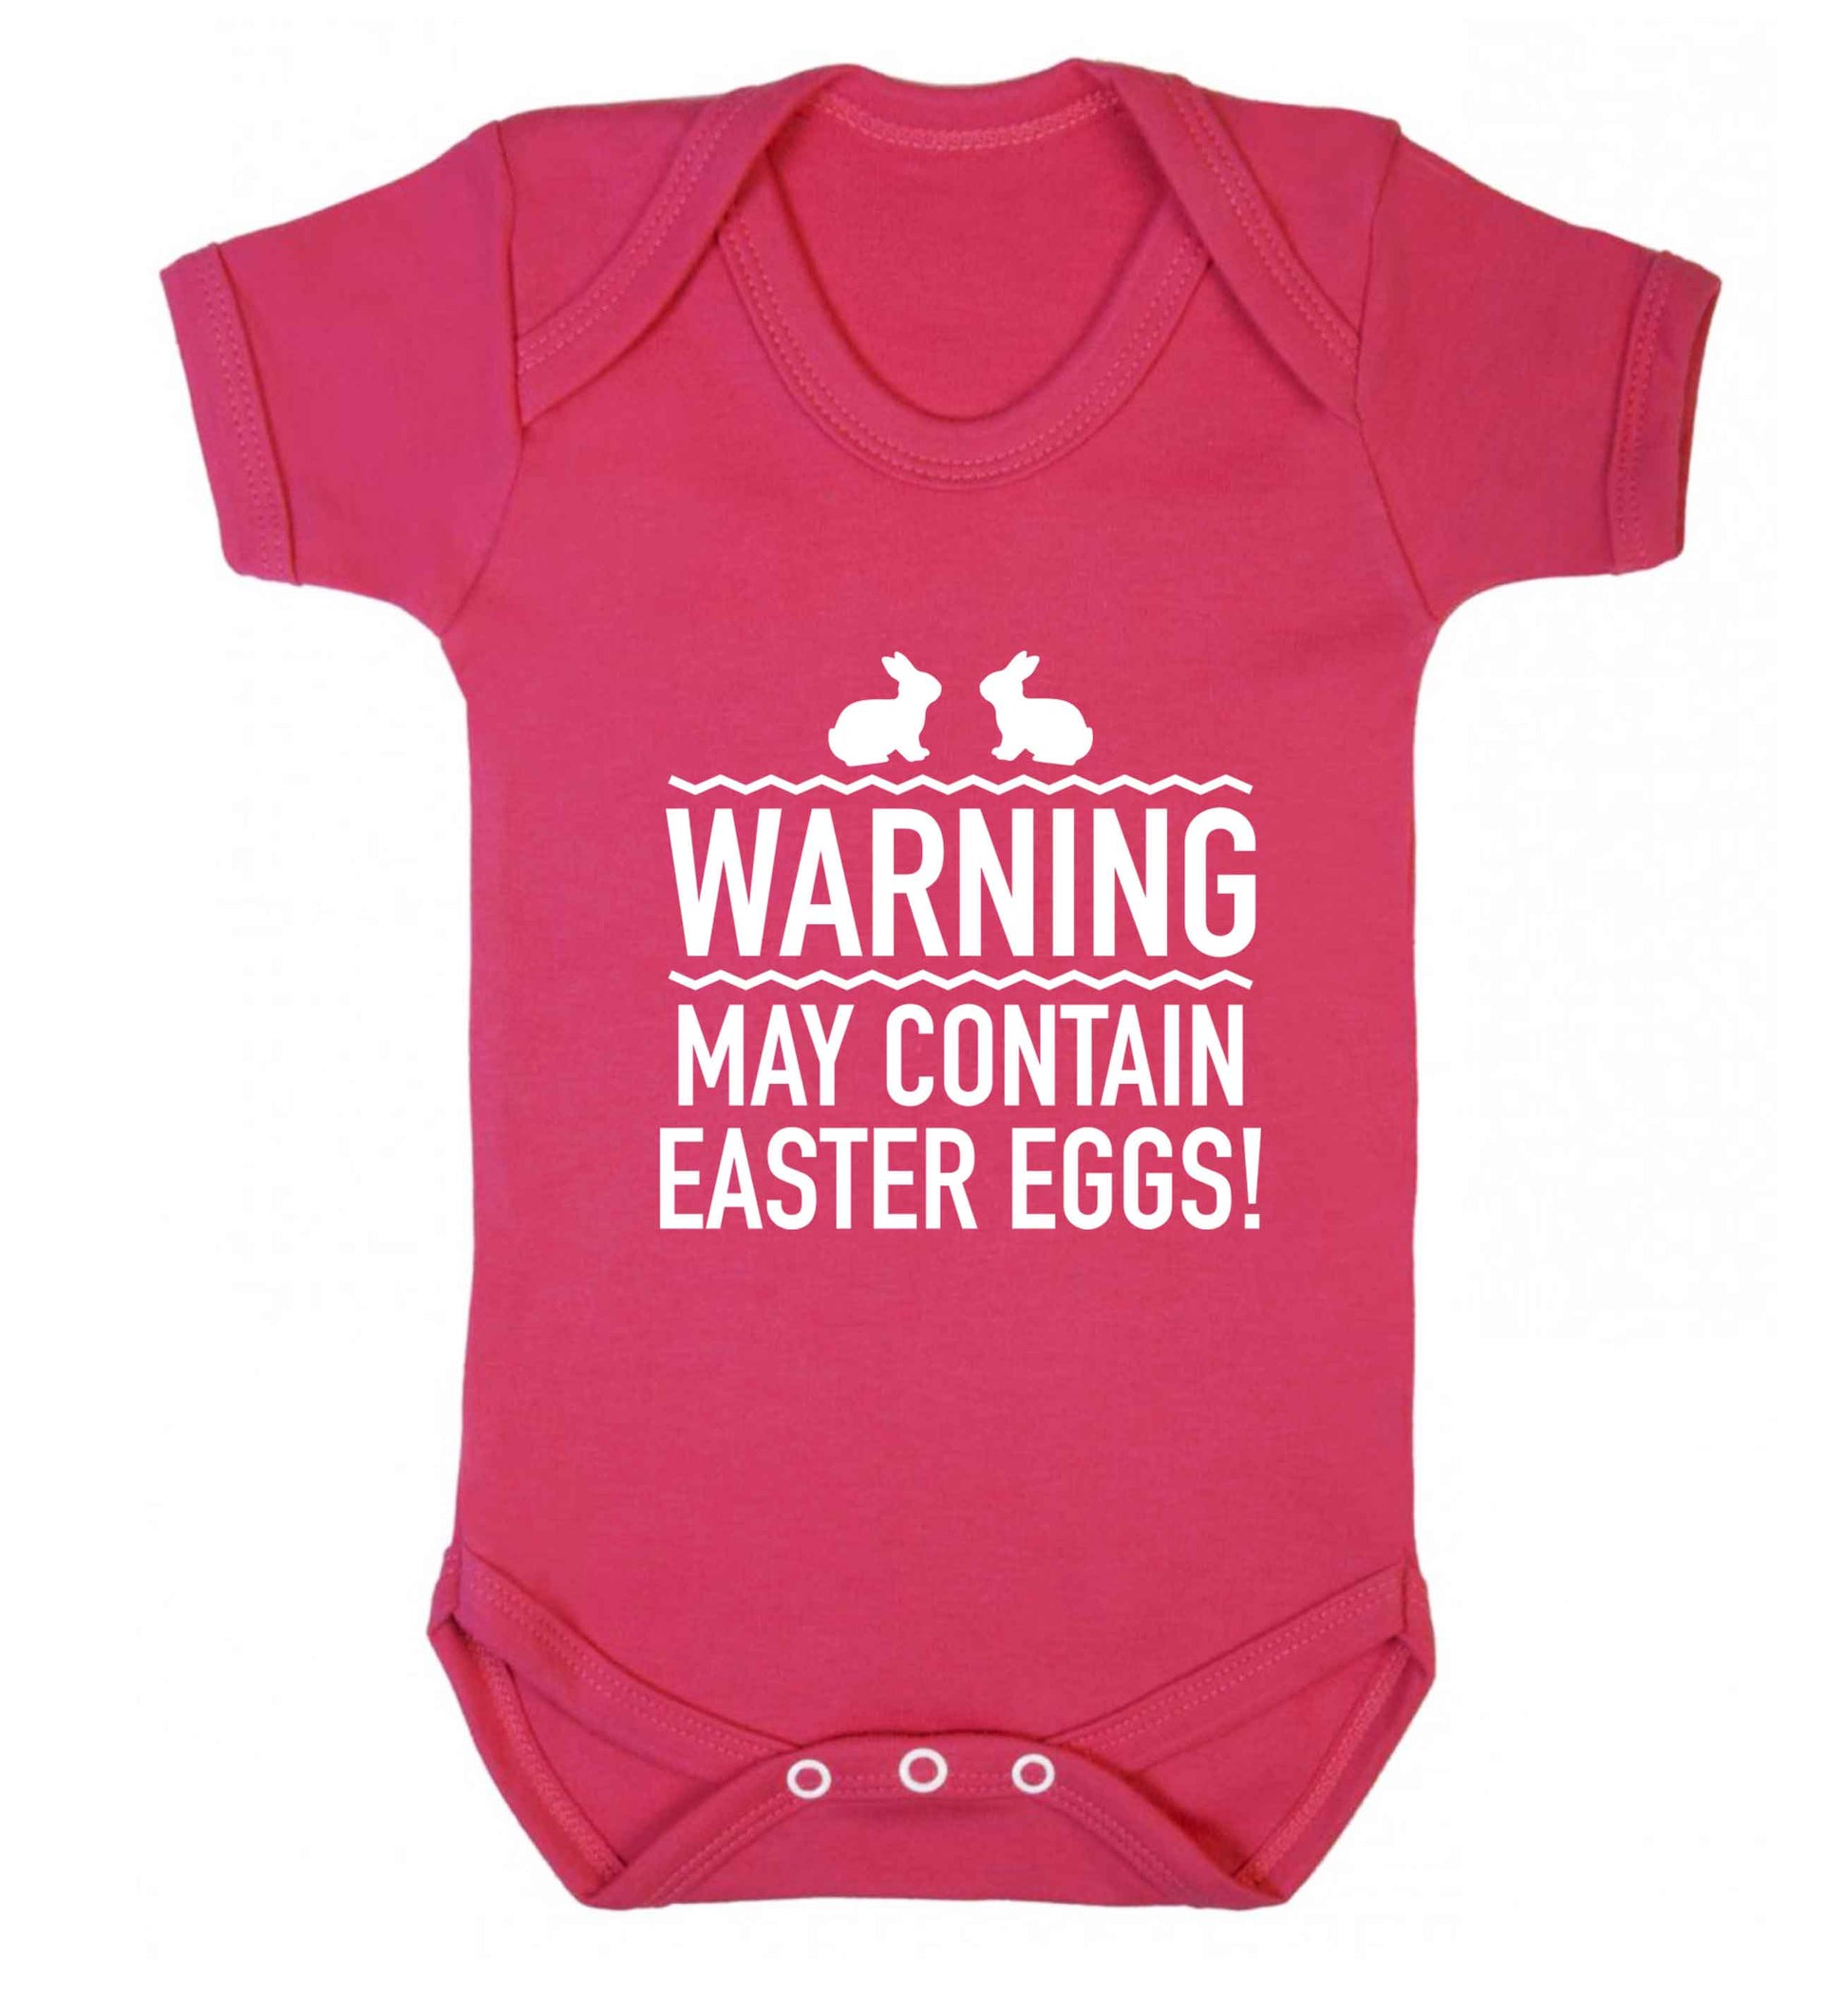 Warning may contain Easter eggs baby vest dark pink 18-24 months